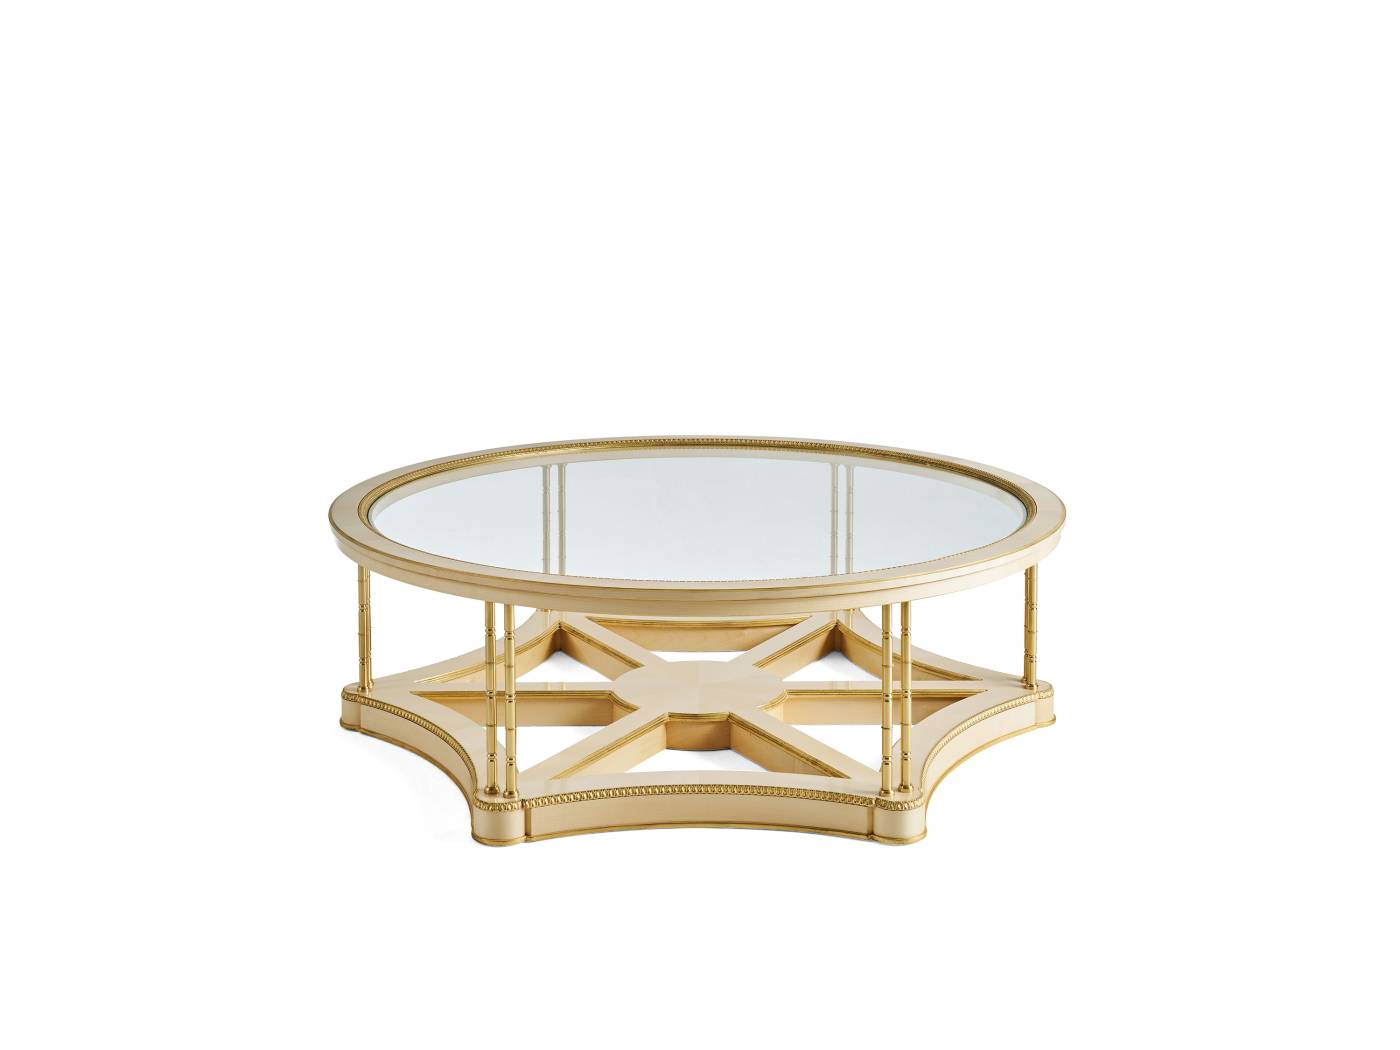 BELLE VIE low table – Transform your space with luxury Made in Italy classic low tables of Héritage collection.